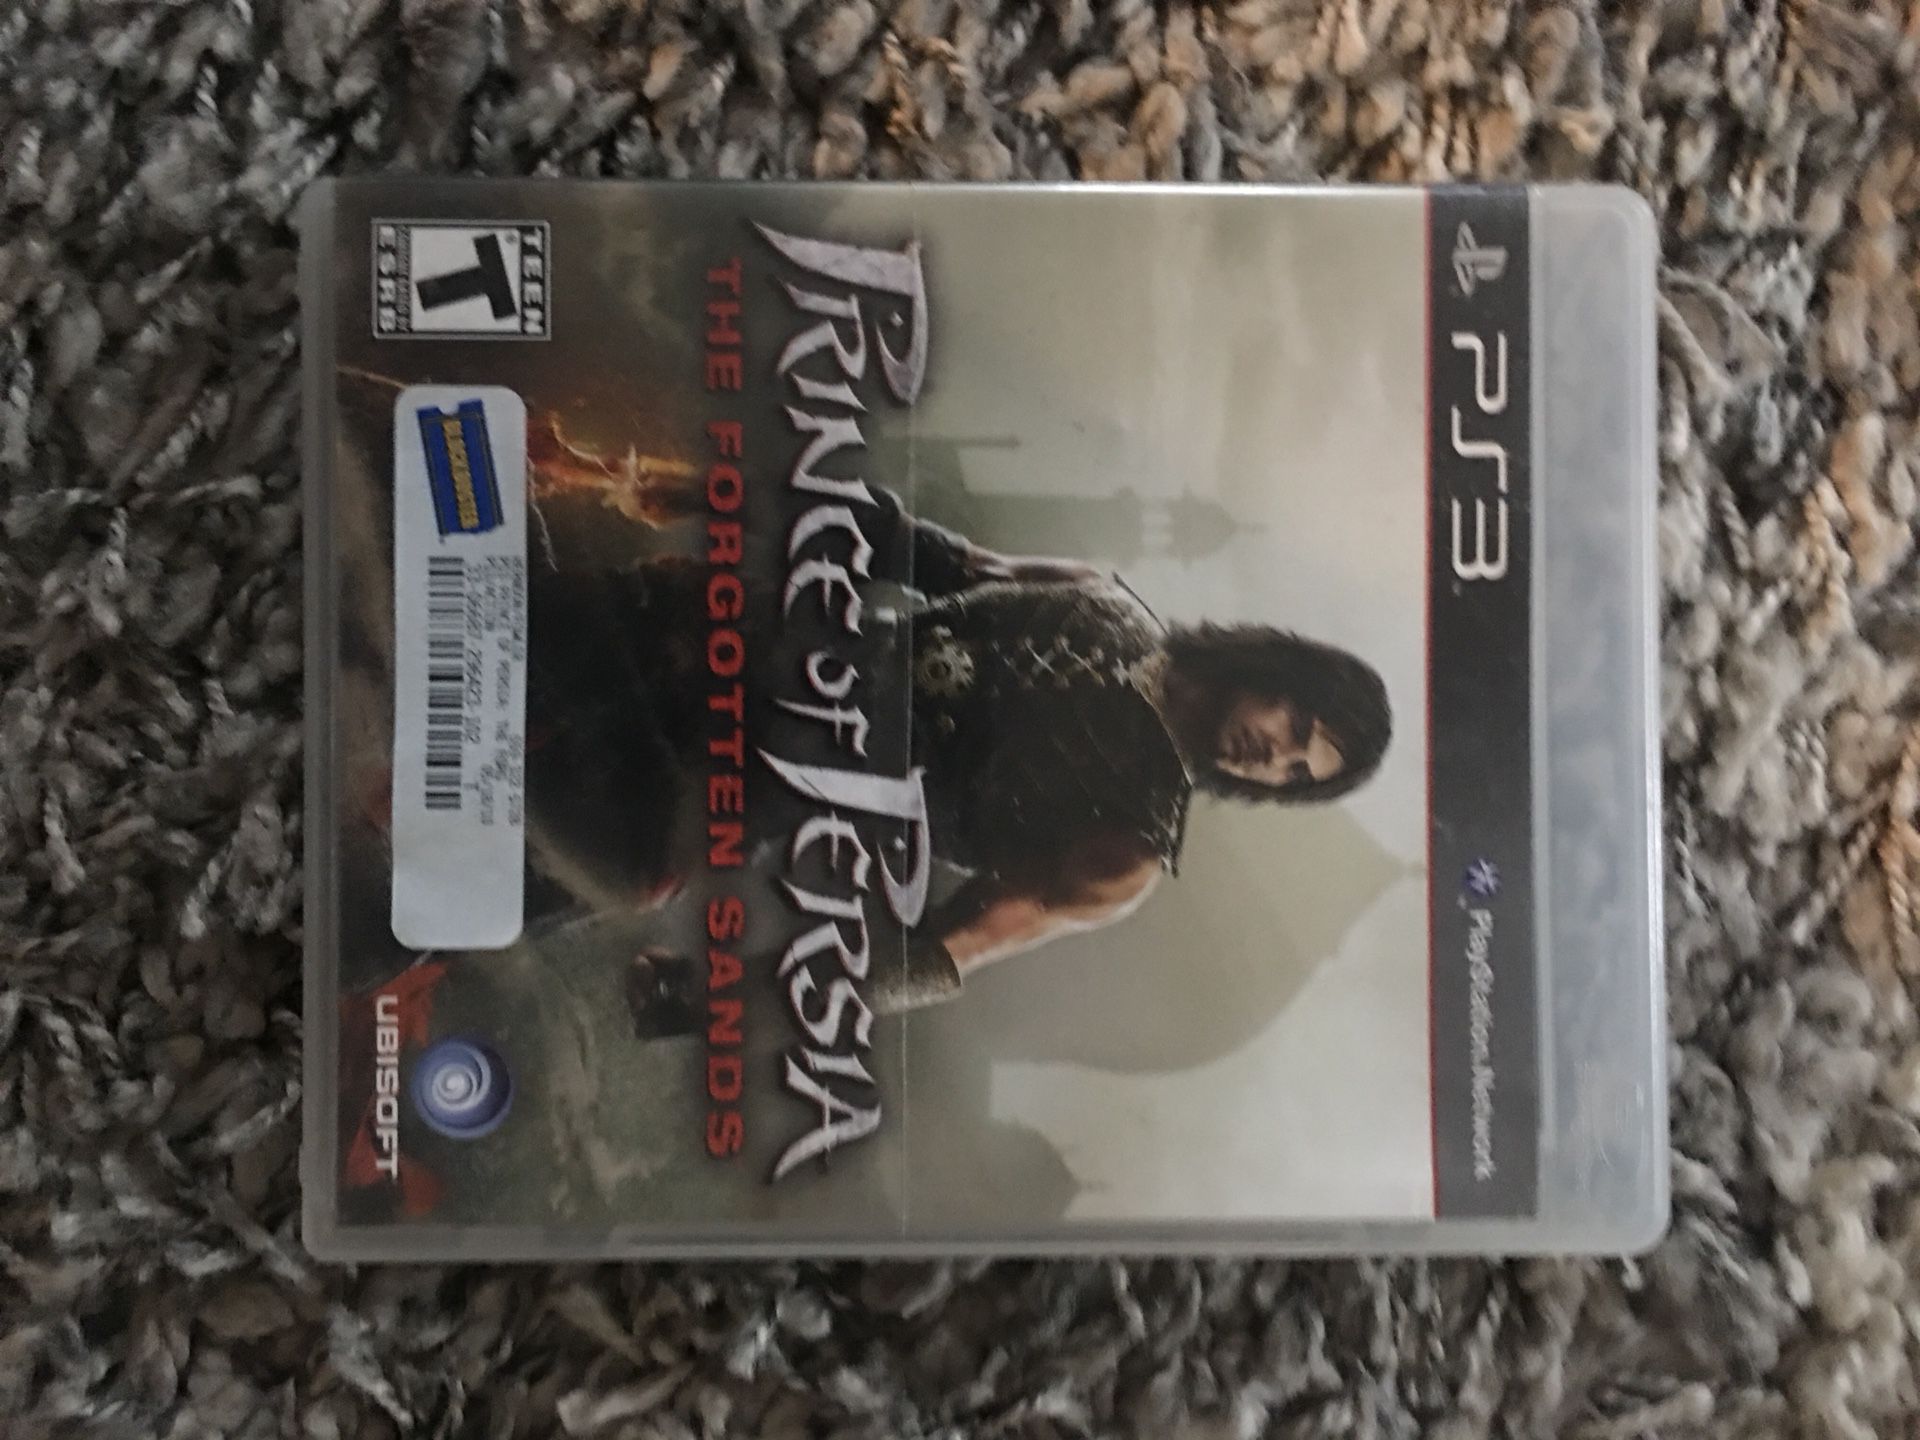 PS3 Game